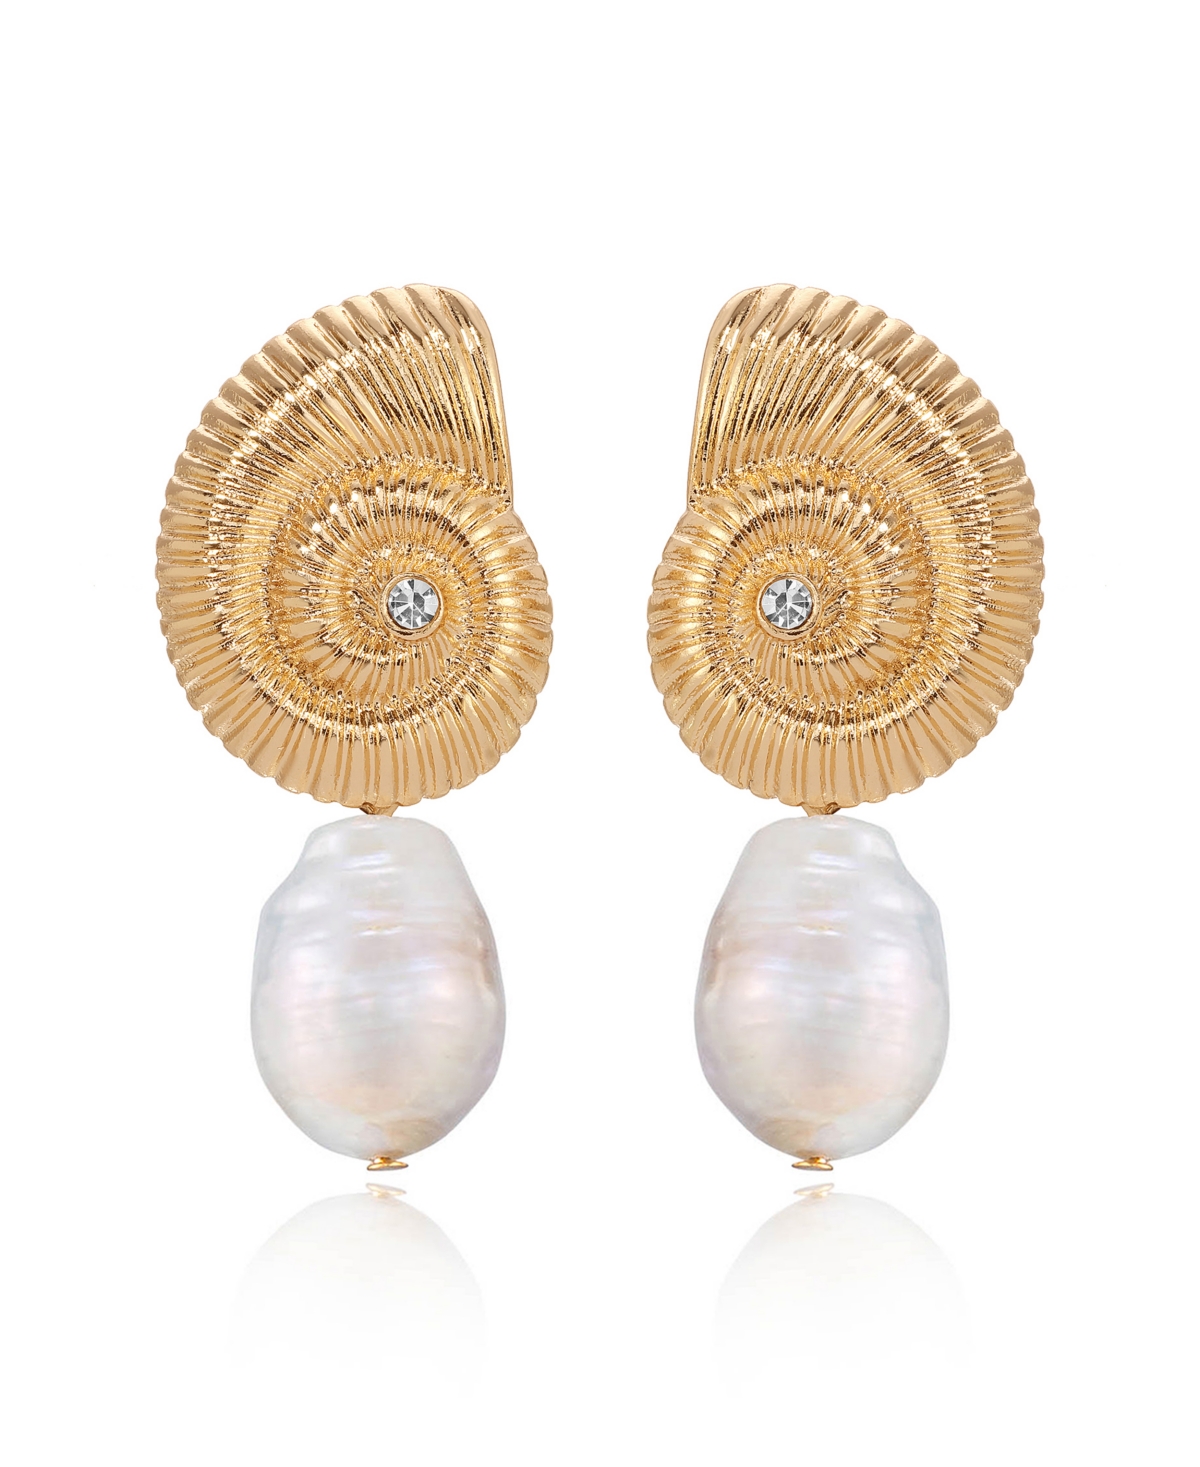 Swirled Shell Freshwater Cultivated Pearl Statement Earrings - Gold